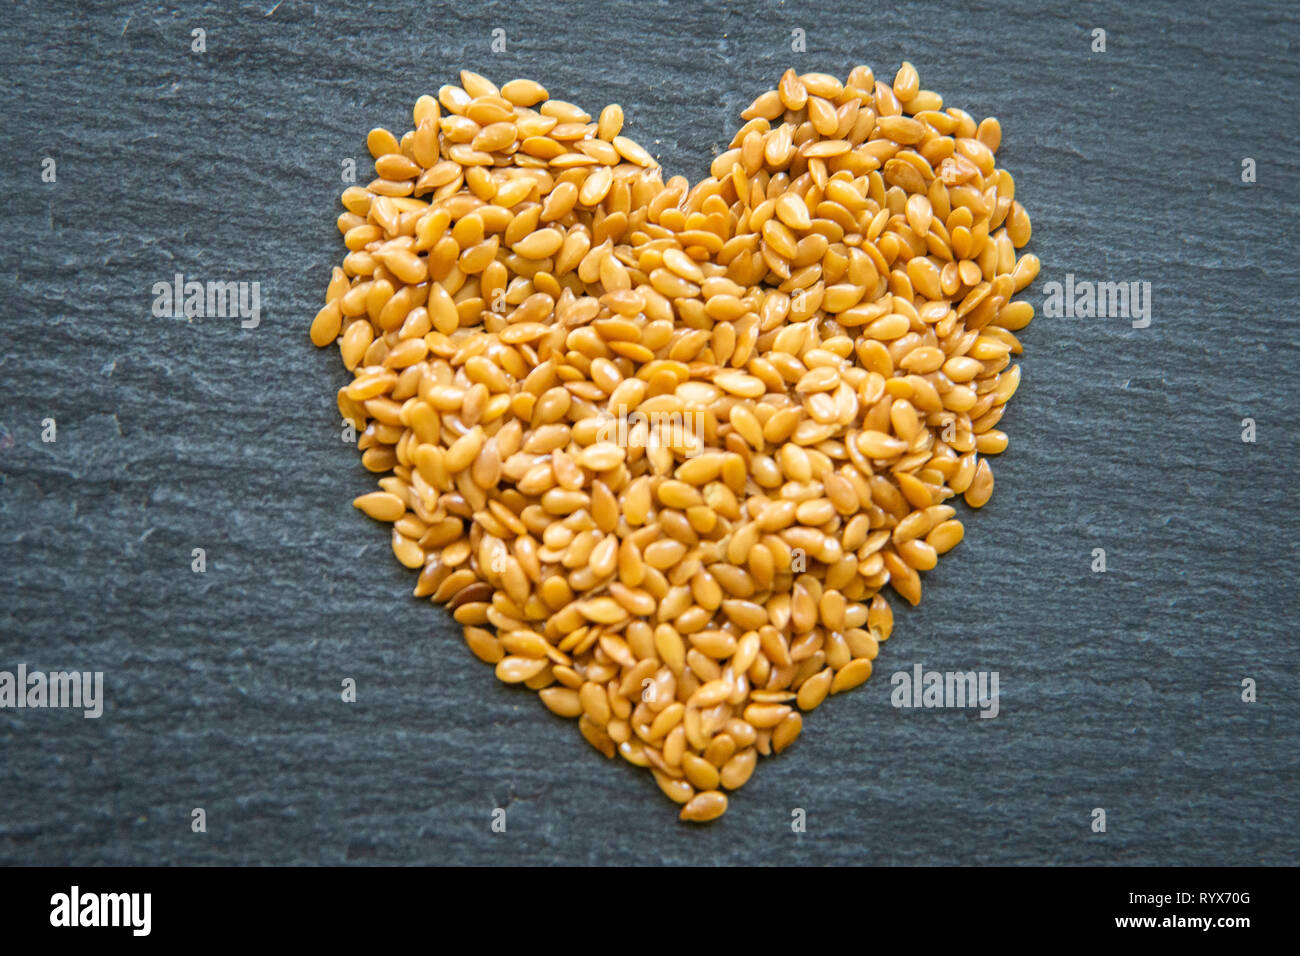 close up of flax seeds in a heart shape on a dark slate background Stock Photo